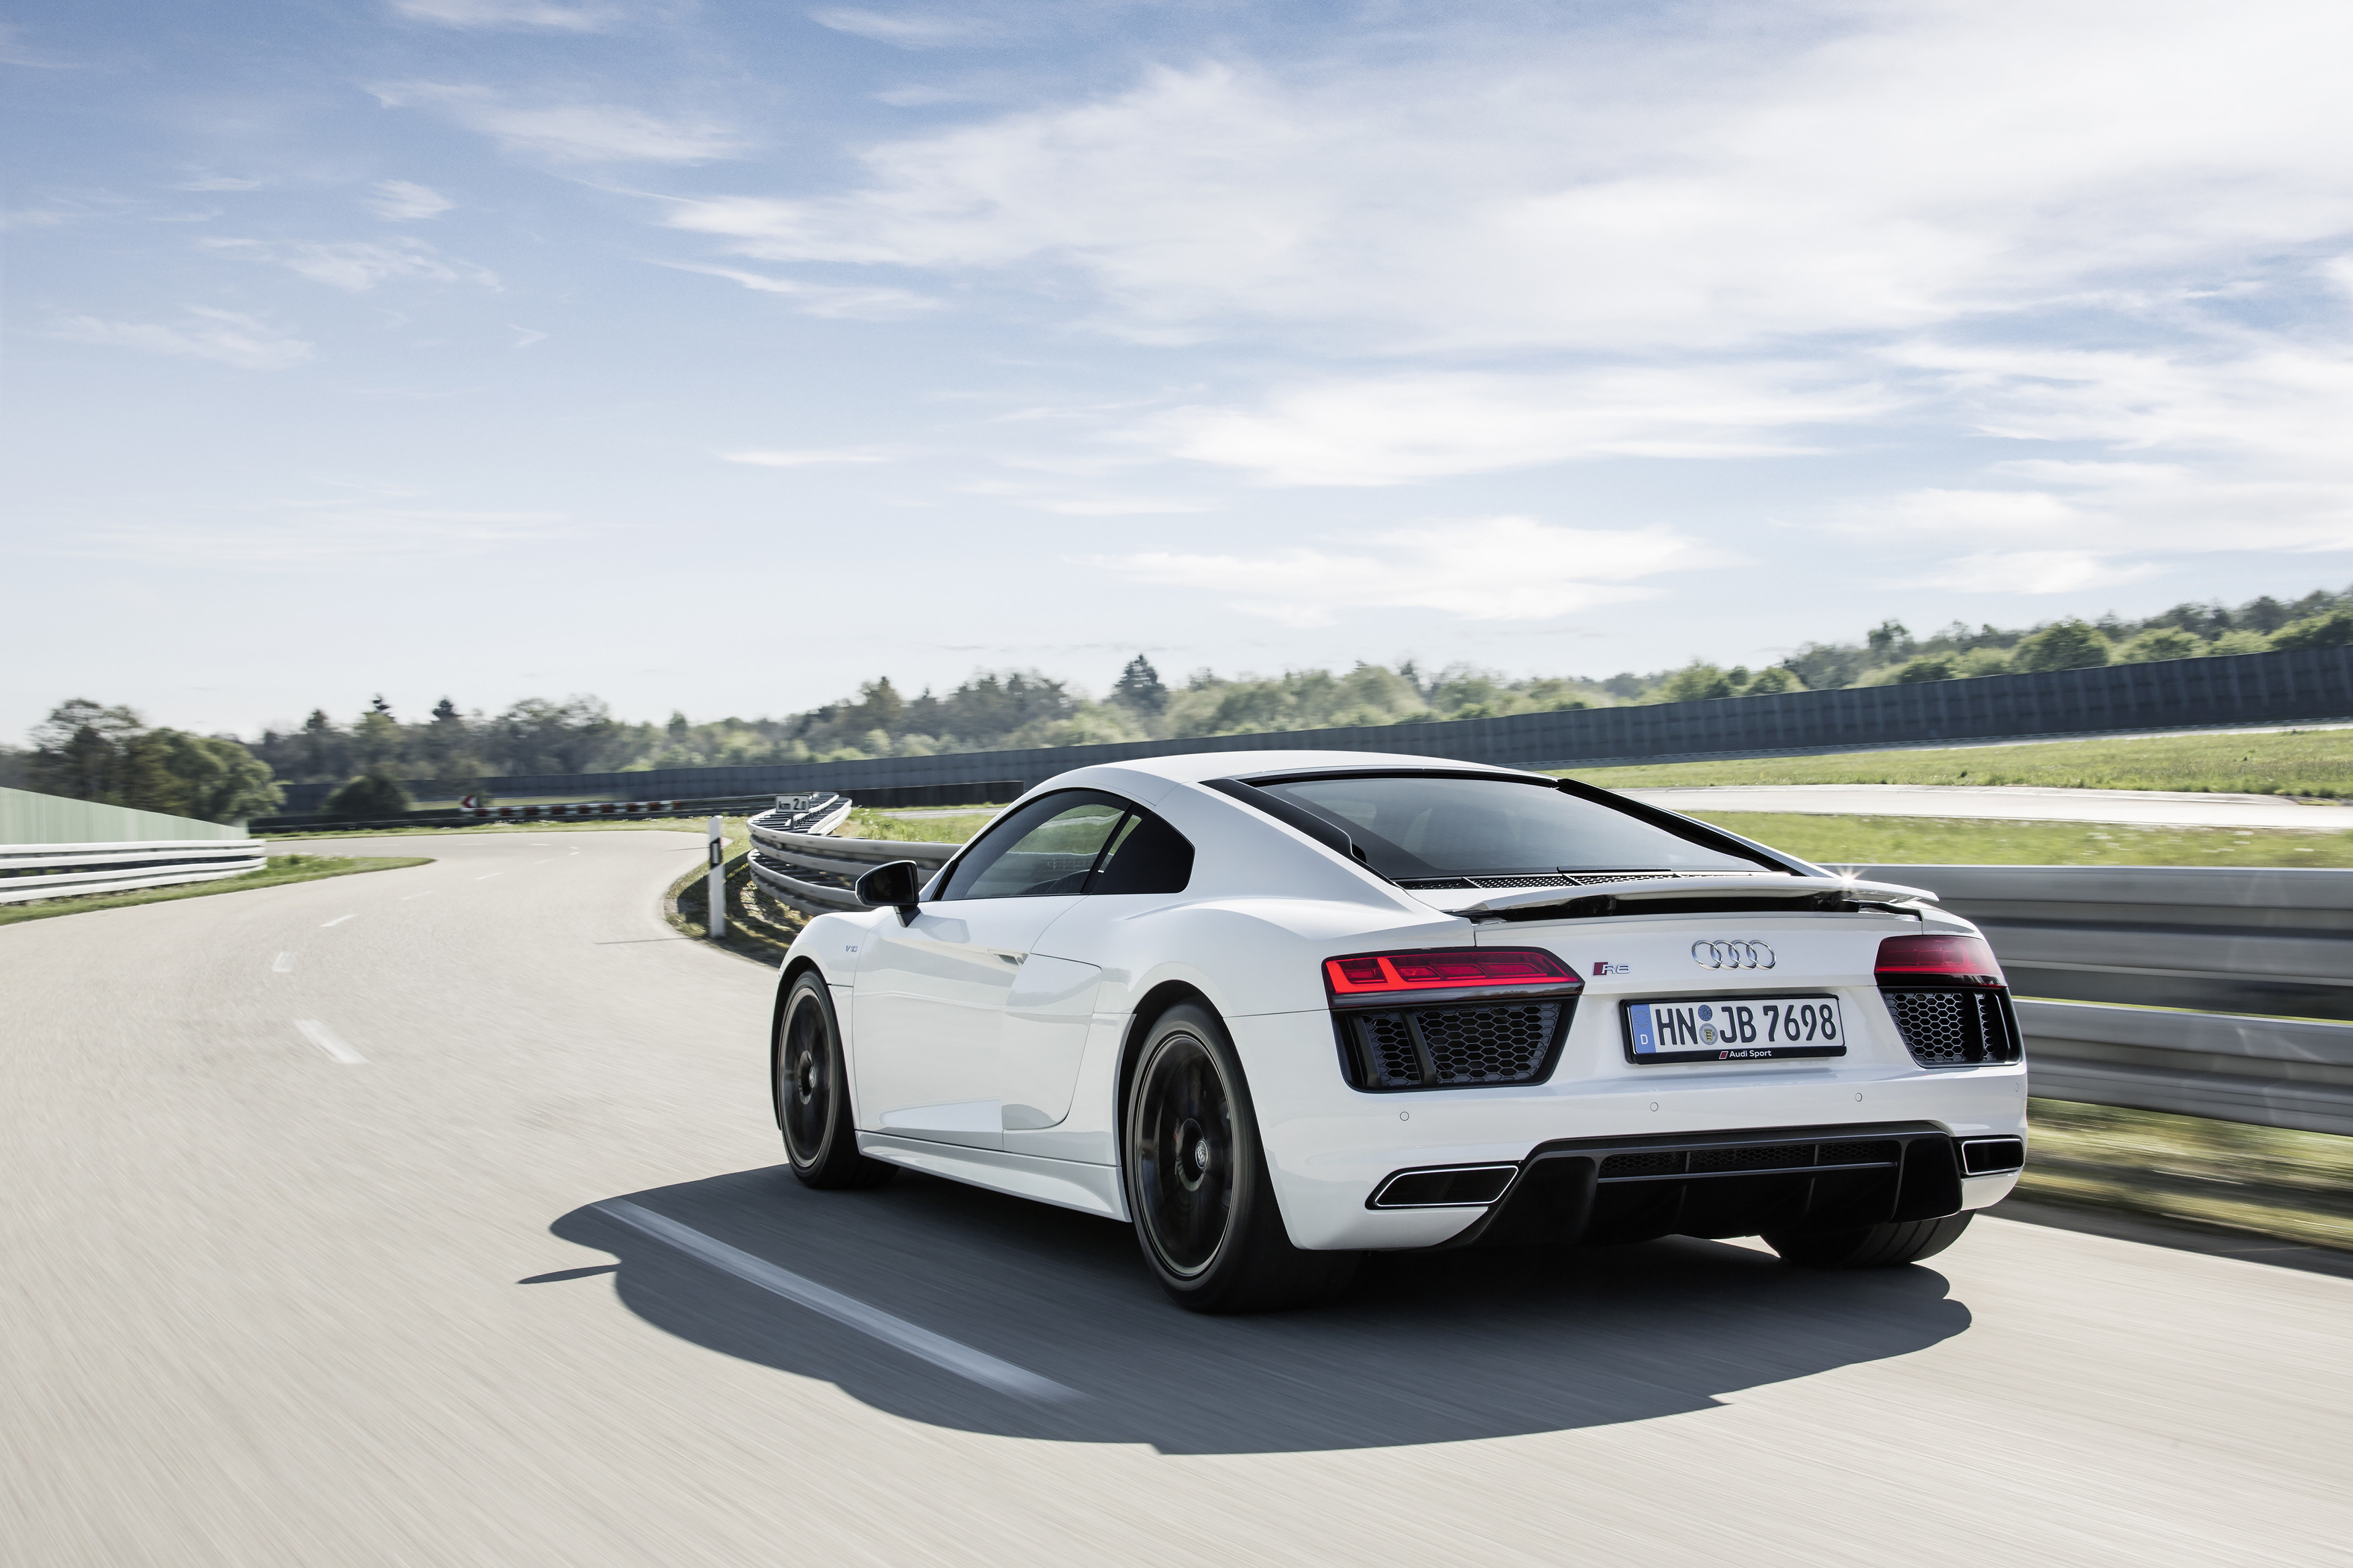 Rear-wheel-drive Audi return with supercar's facelift